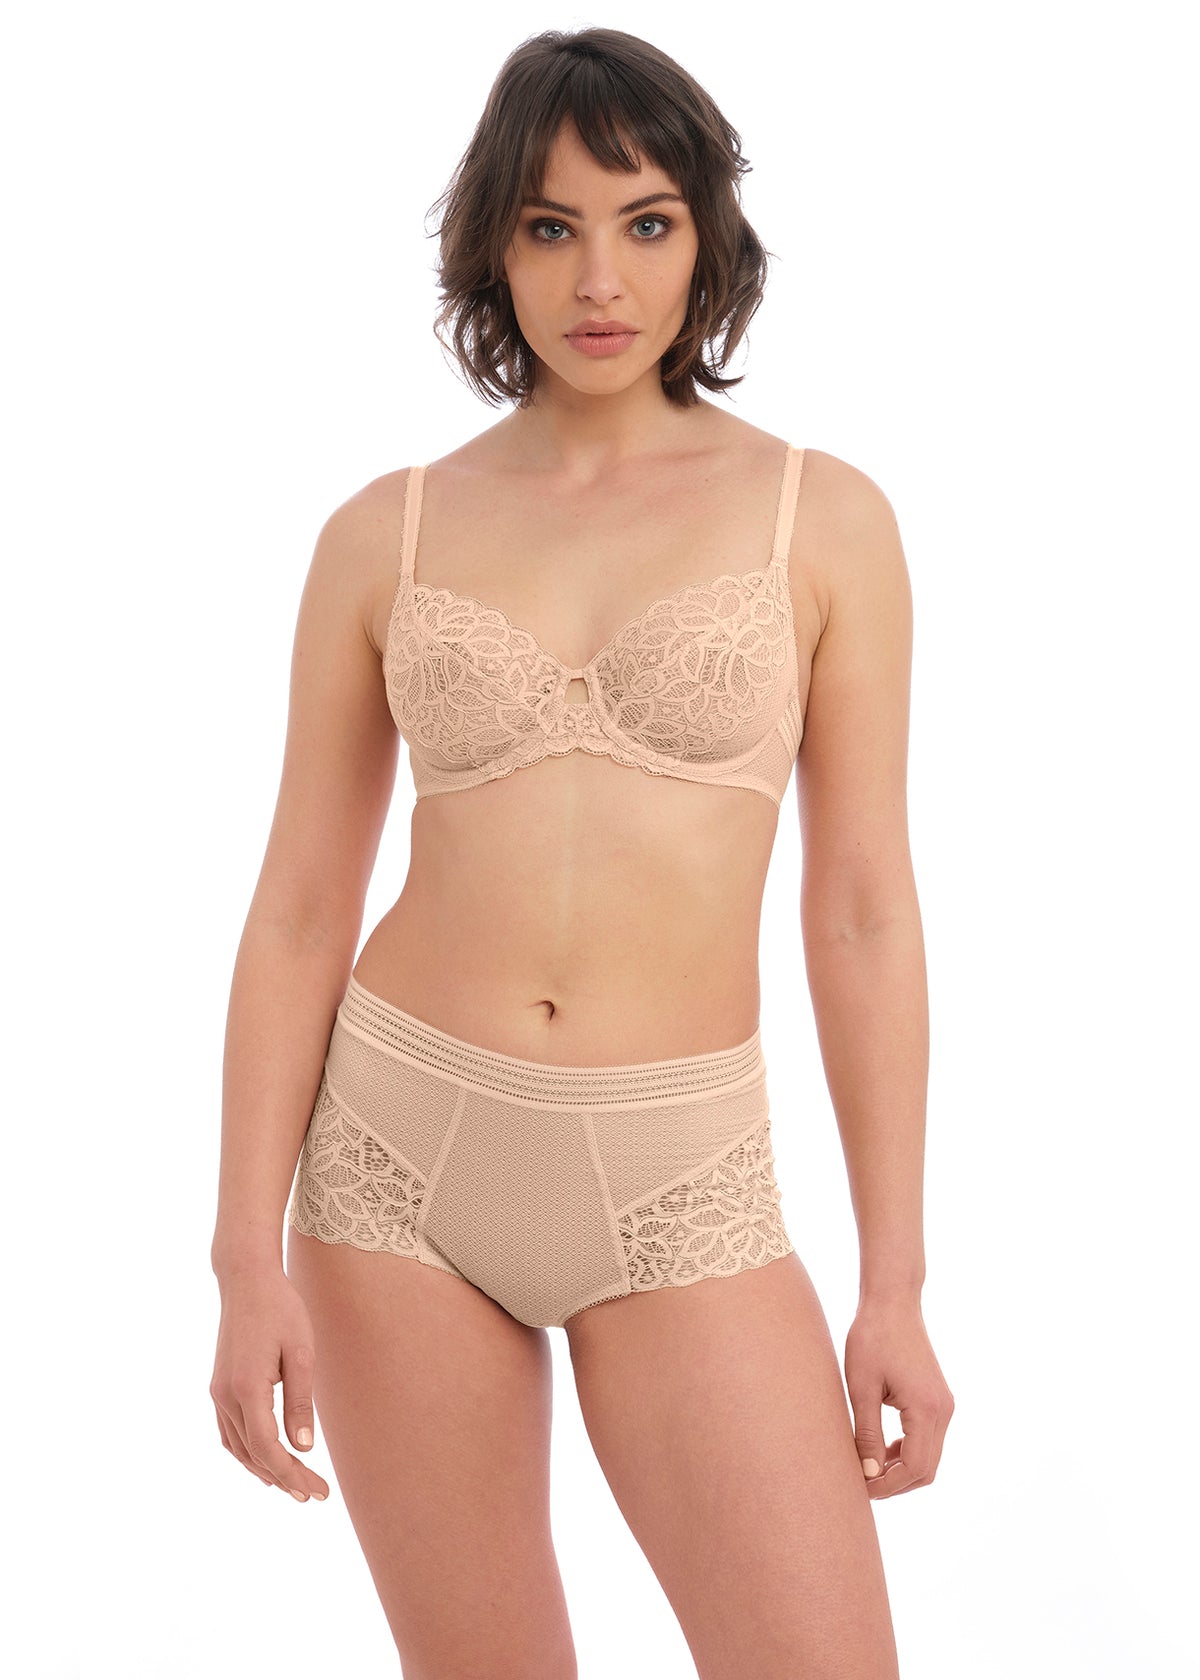 Pretty Things Wacoal Raffine Non-Padded Lace Nude Bra - Underwear Specialists